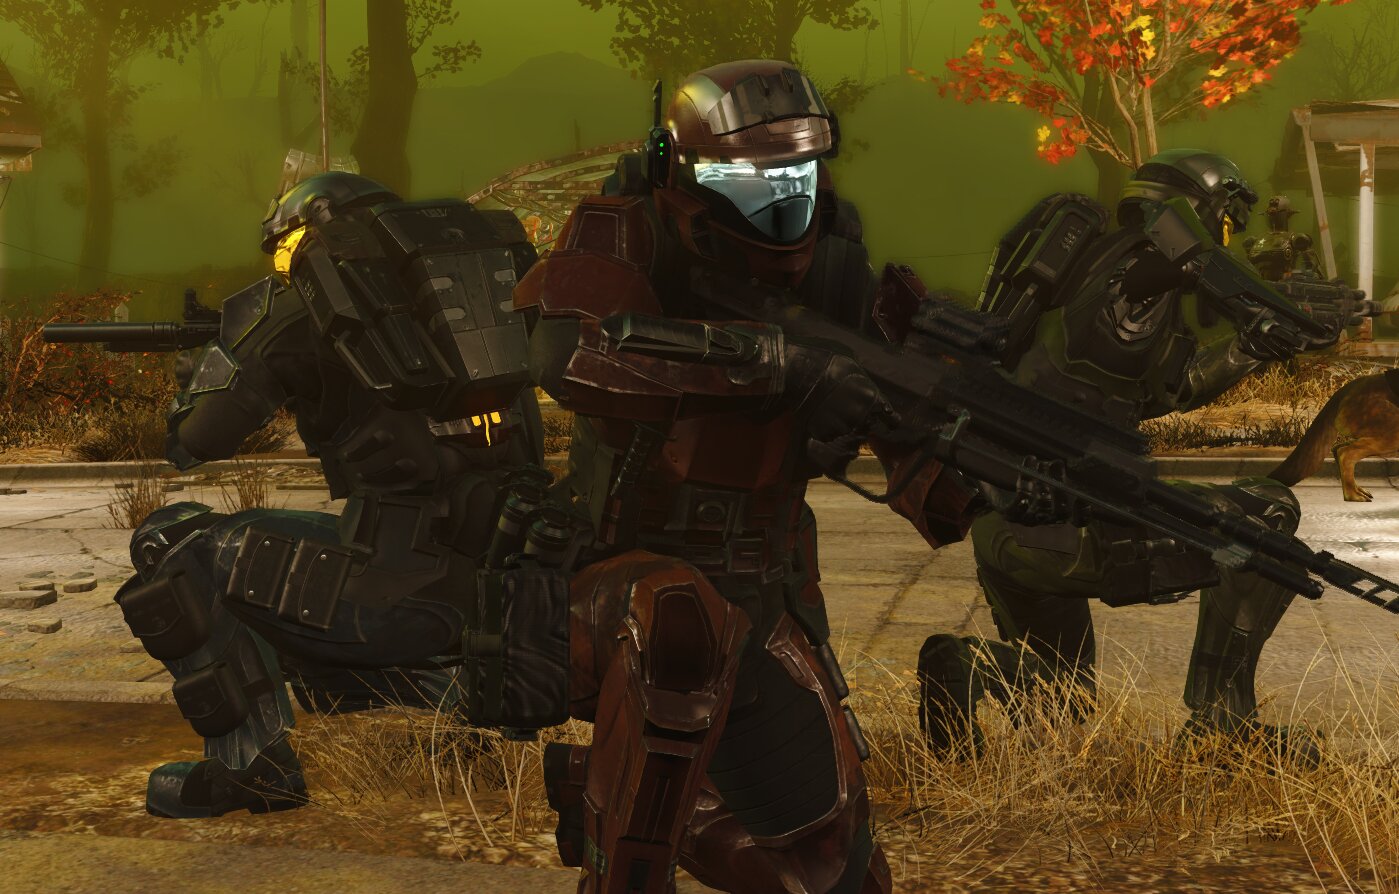 Fallout 4 mod lets you play as a Halo Helljumper